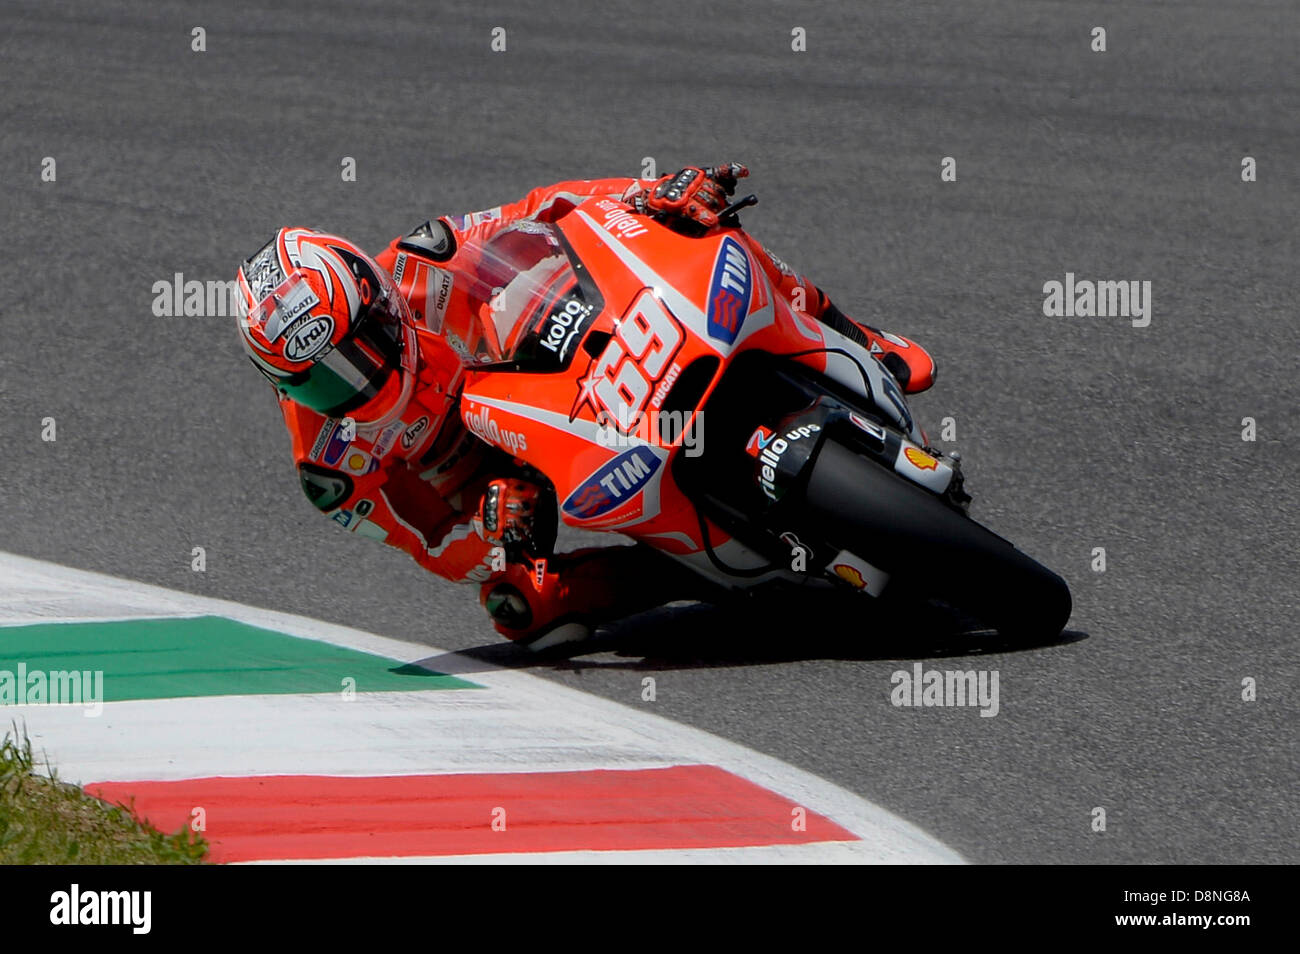 Mugello,Italy.1st June 2013. Nicky Hayden (Ducati team) during the qualifying session of  Moto GP World Championship from the Mugello racing circuit. Credit:  Gaetano Piazzolla/Alamy Live News Stock Photo